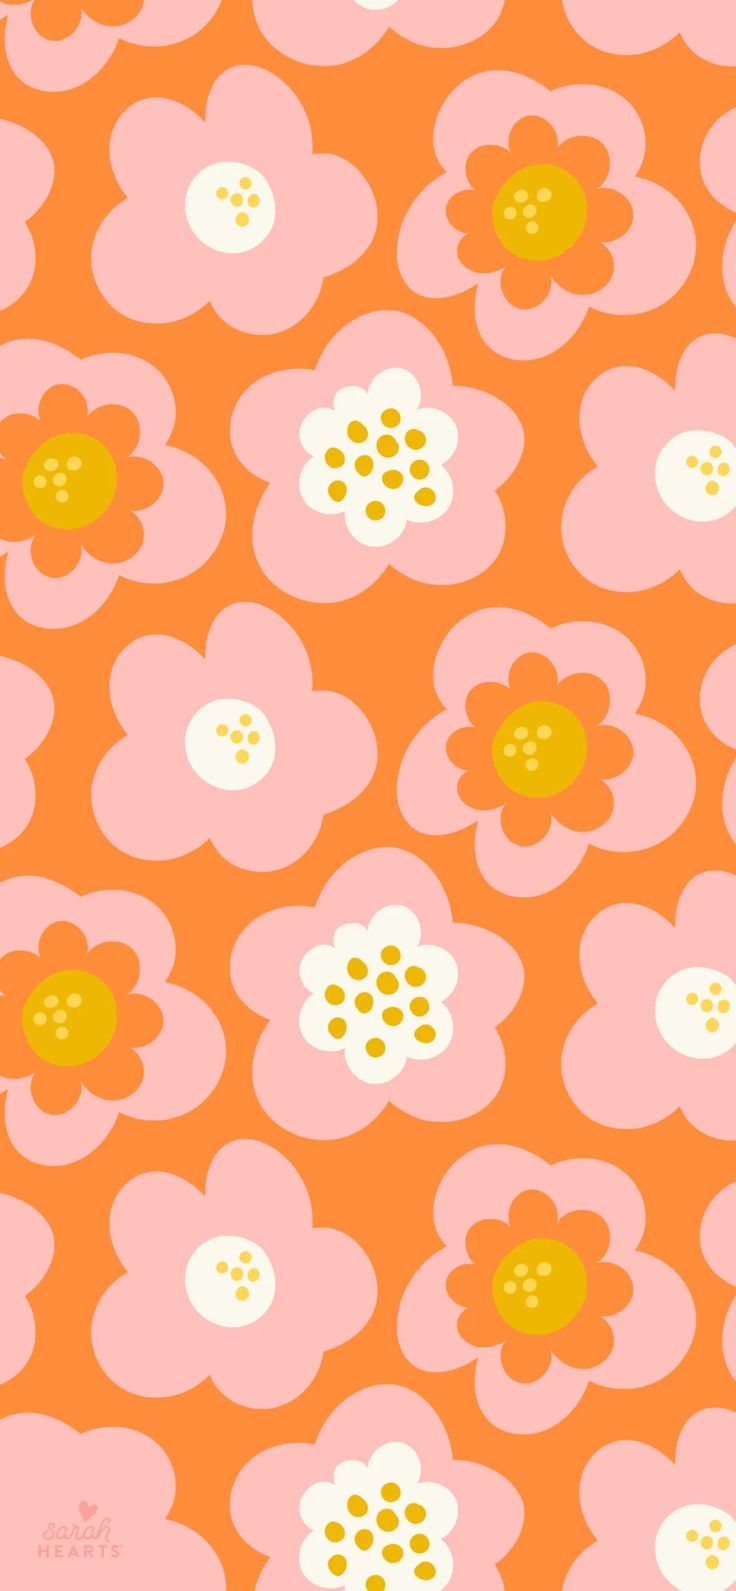 May 2021 Floral Calendar Wallpaper Hearts. Floral wallpaper iphone, iPhone wallpaper trendy, iPhone wallpaper pattern